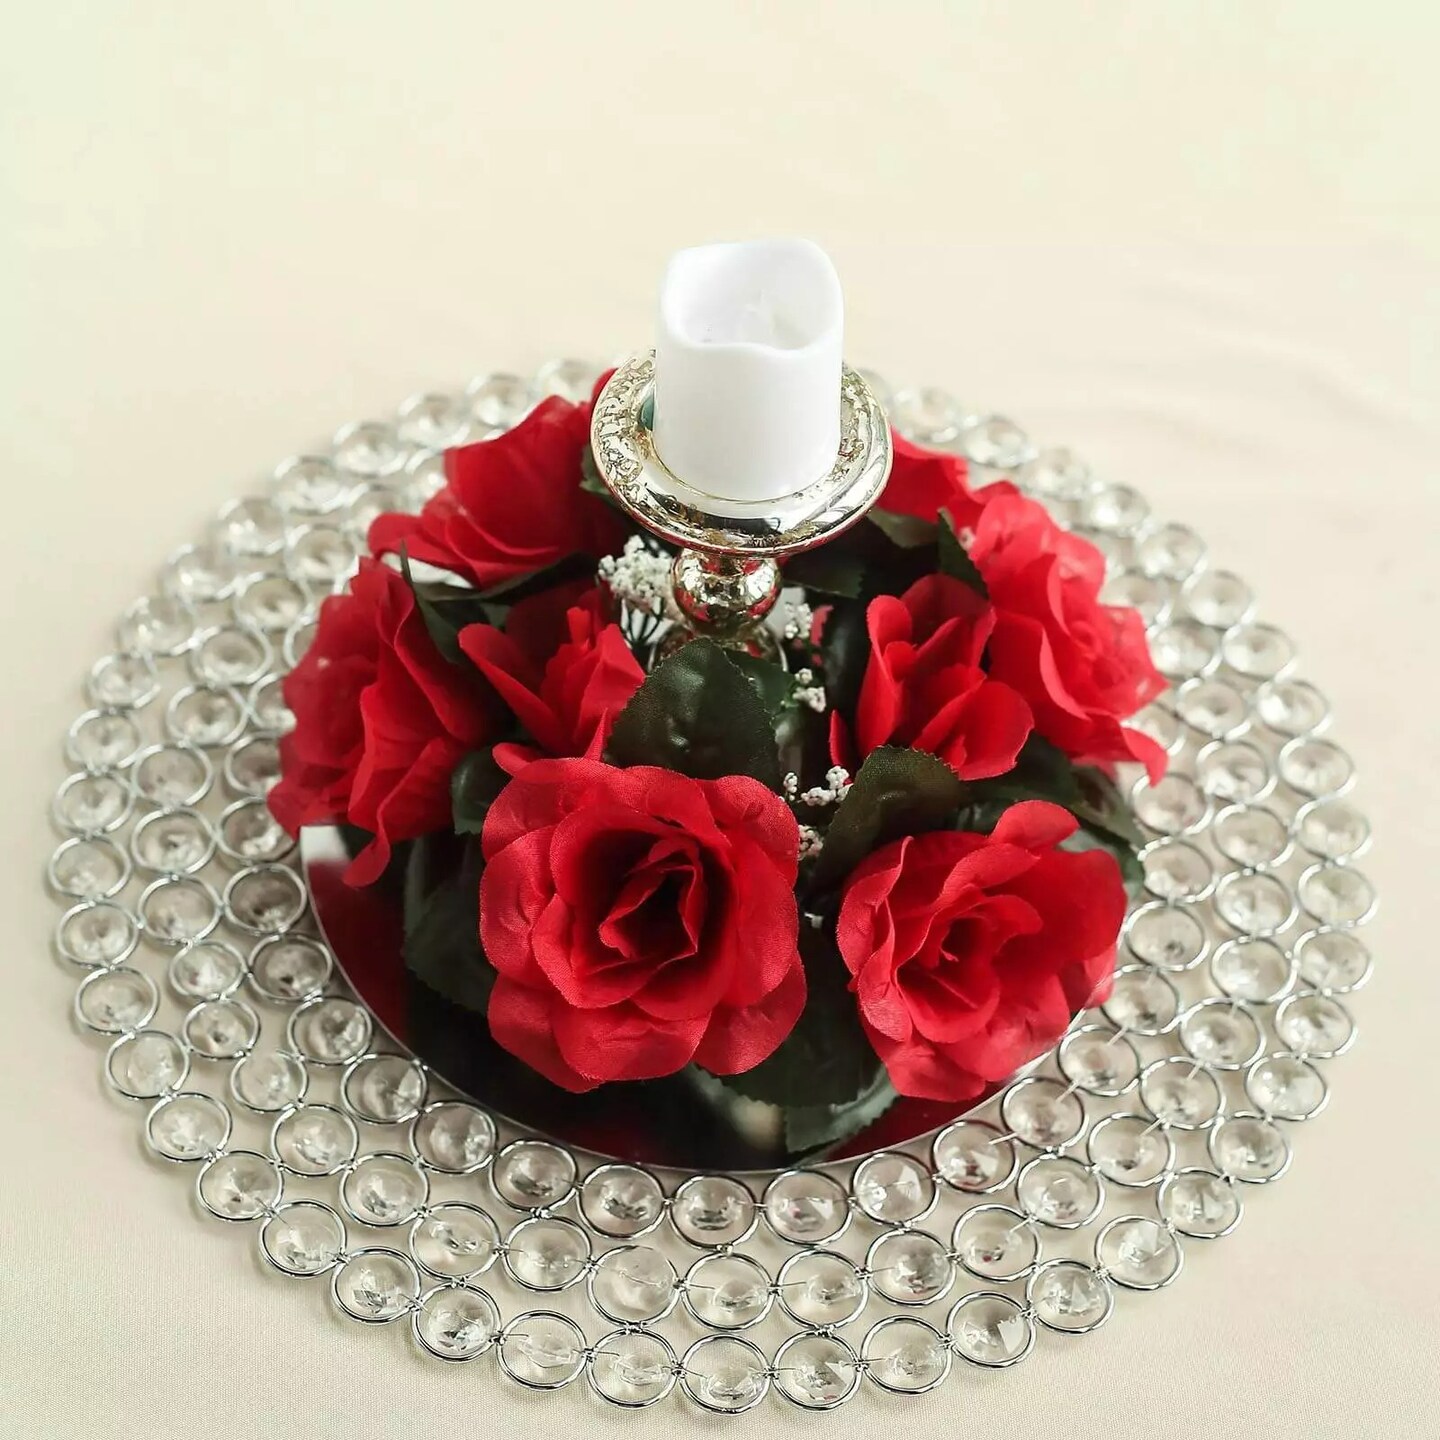 4 Red CANDLE RINGS with SILK ROSES Wedding Flowers